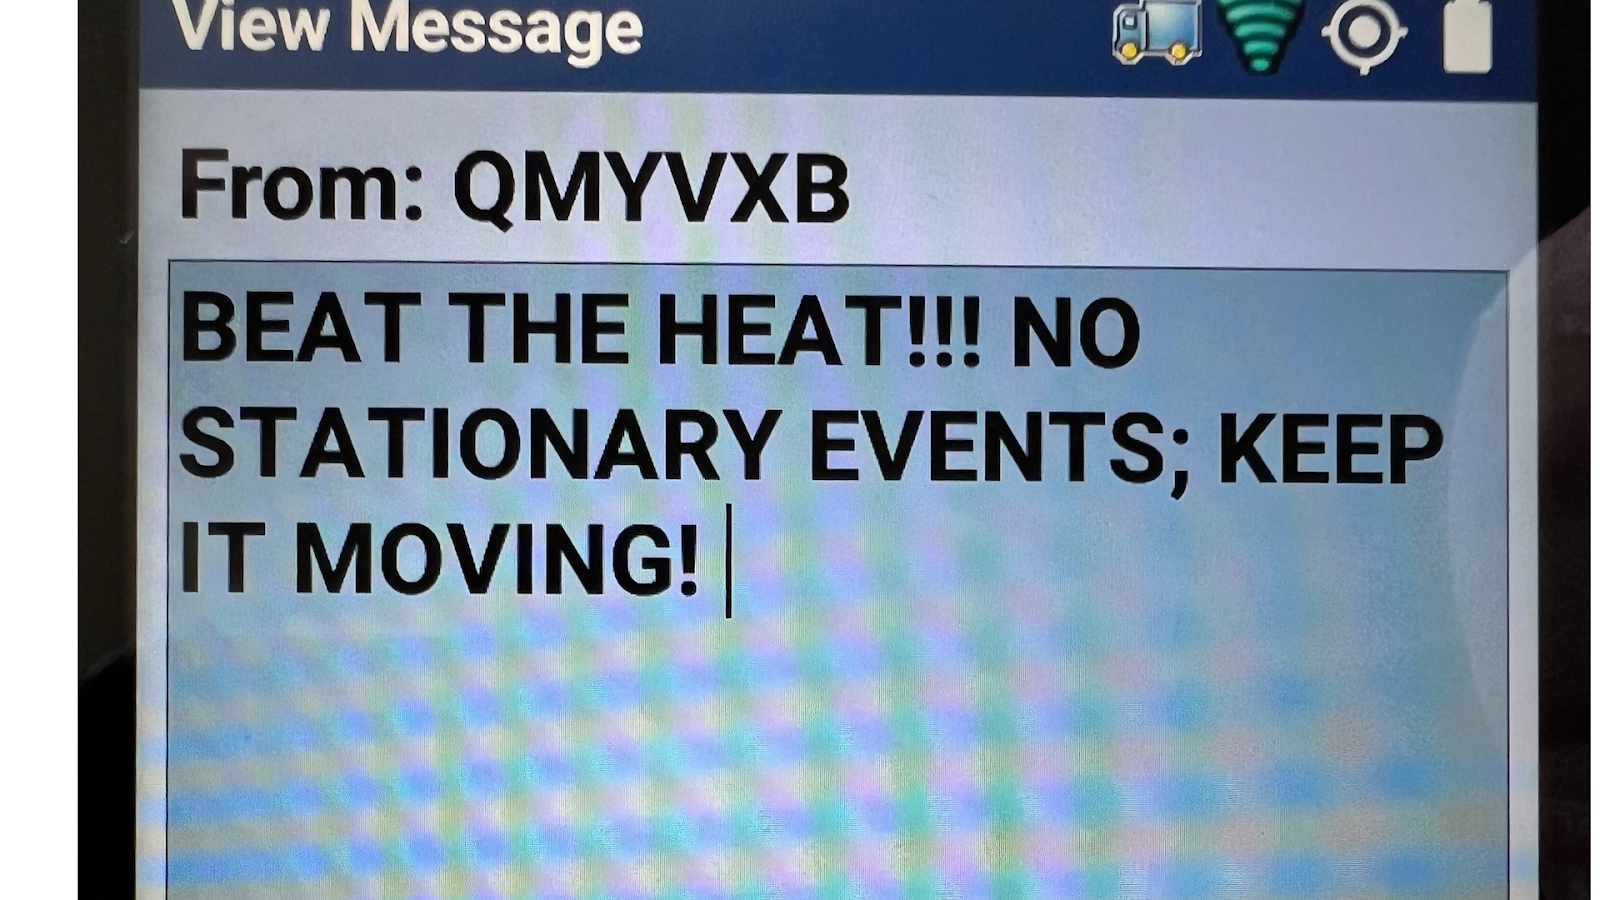 This image shows a message mail carriers received, stating, "Beat the heat!!! No stationary events; keep it moving!"